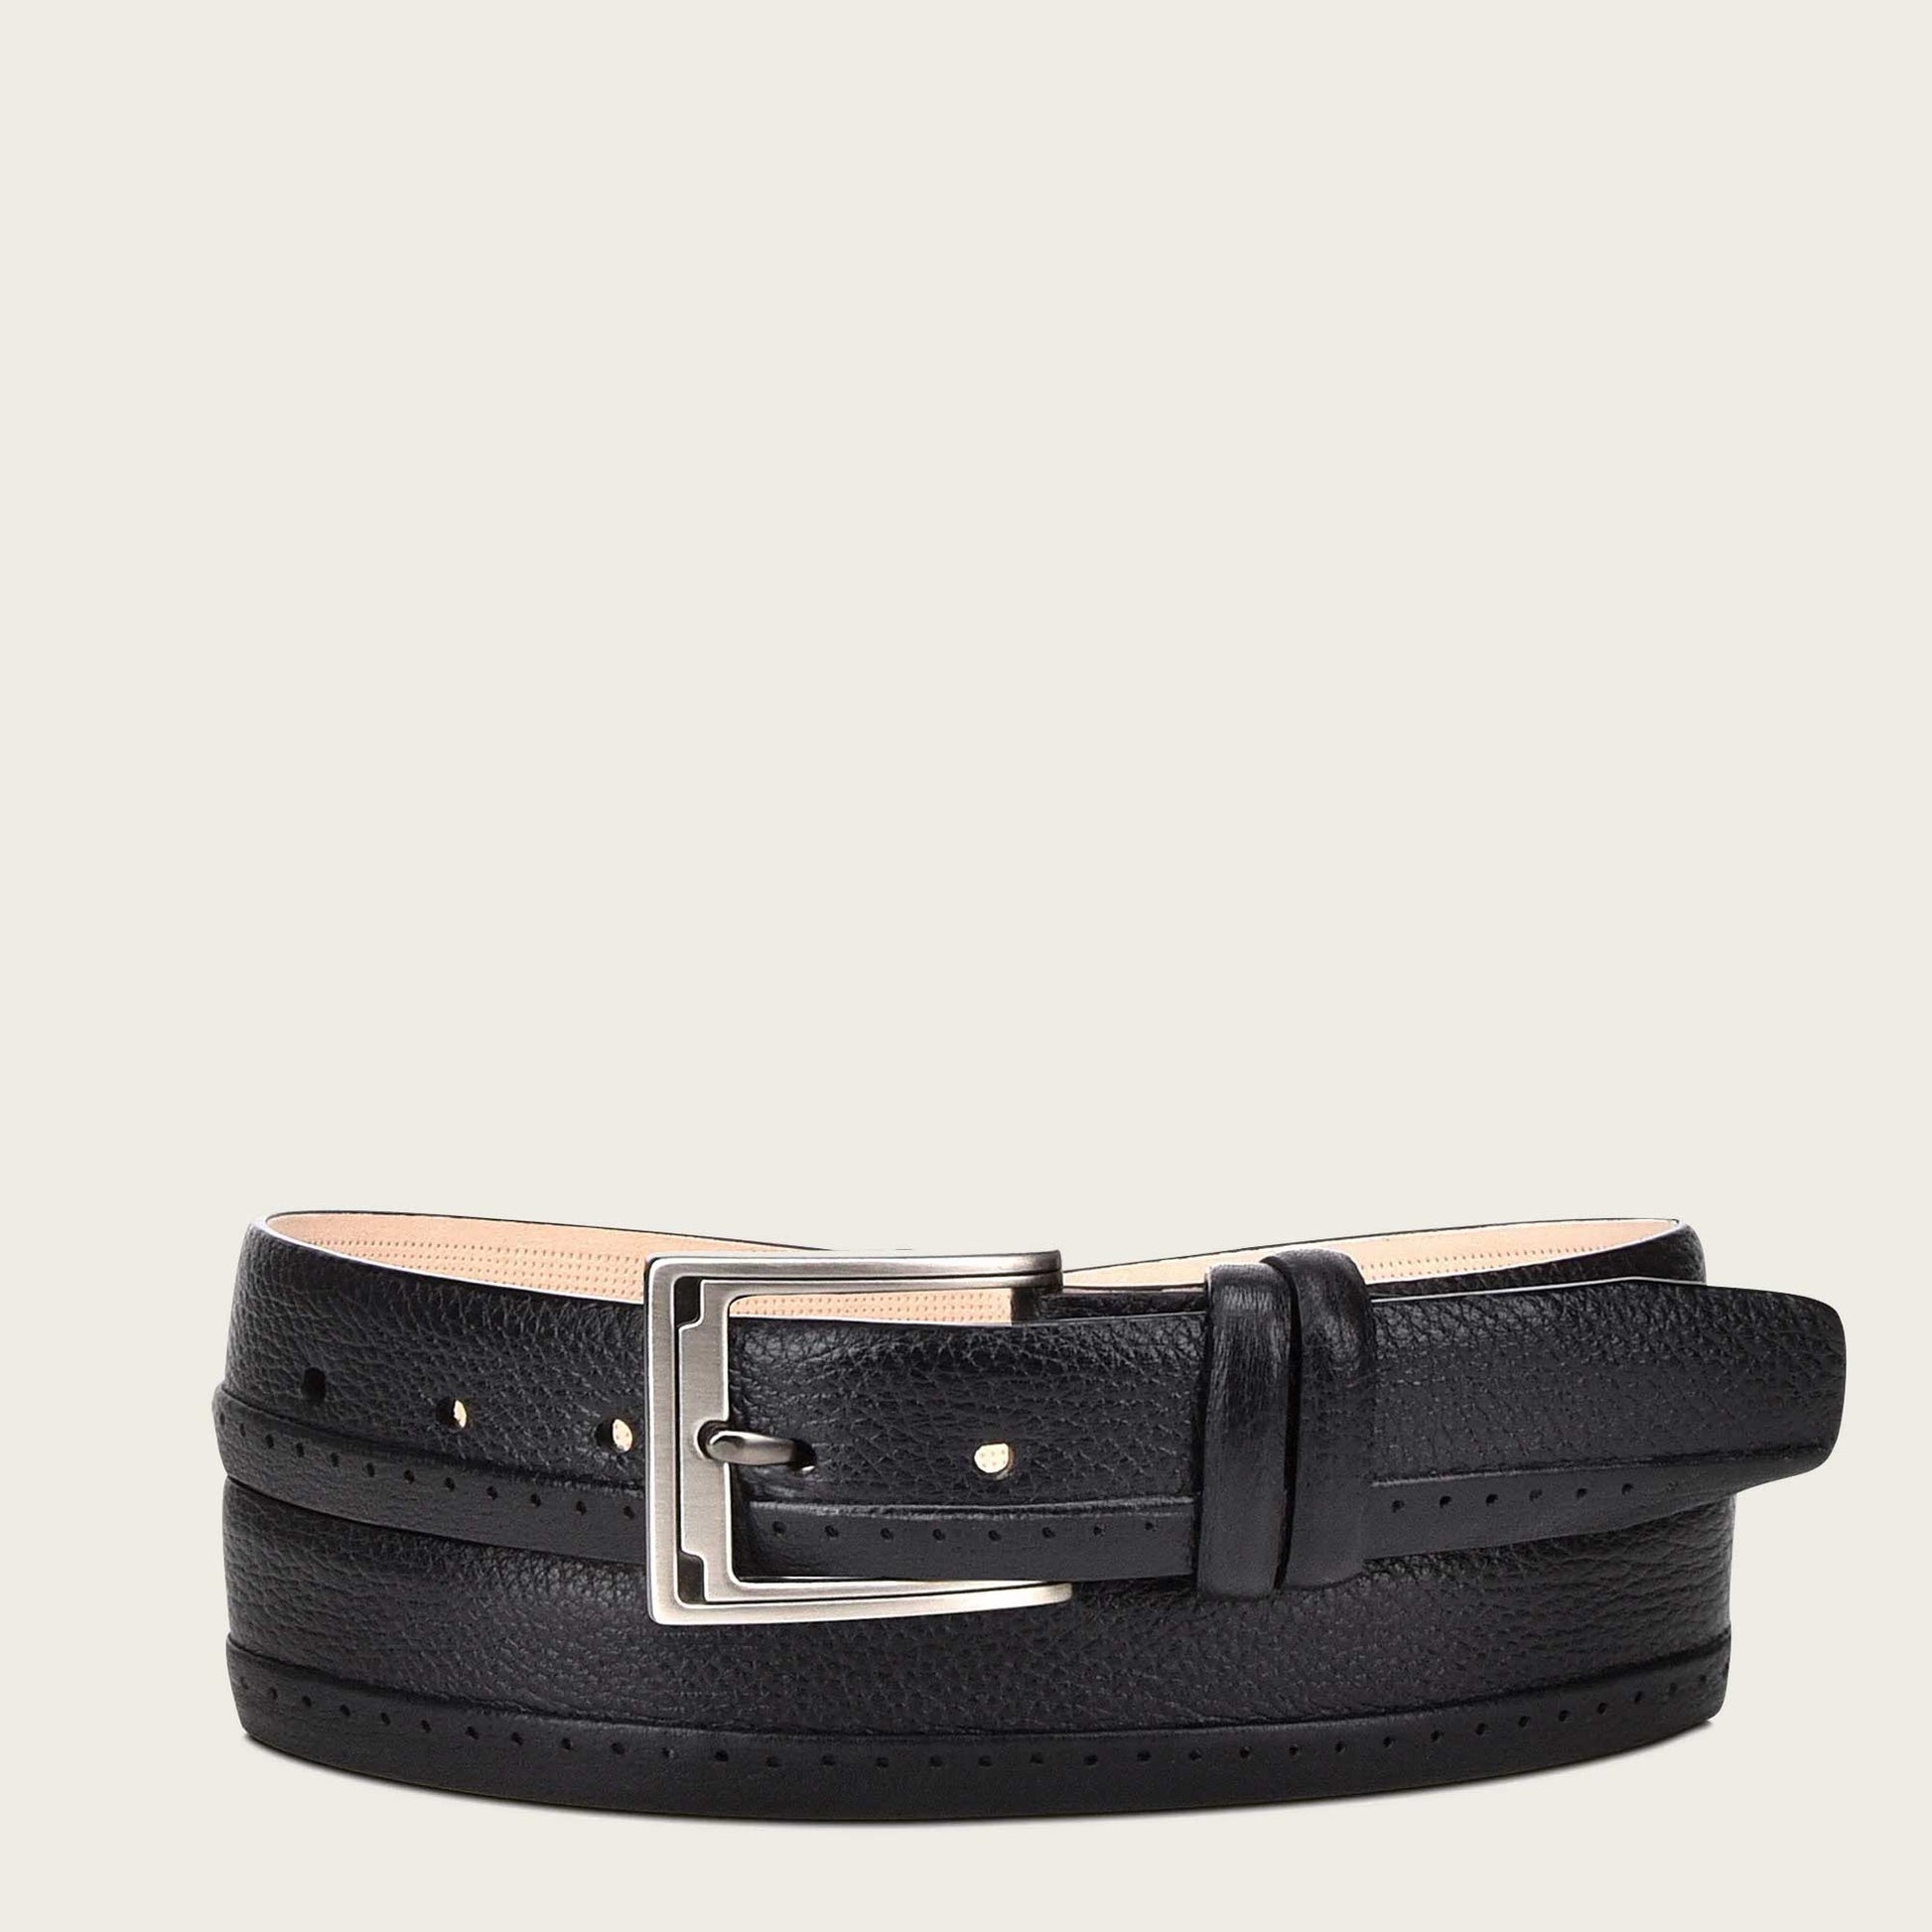 Perforated black leather belt